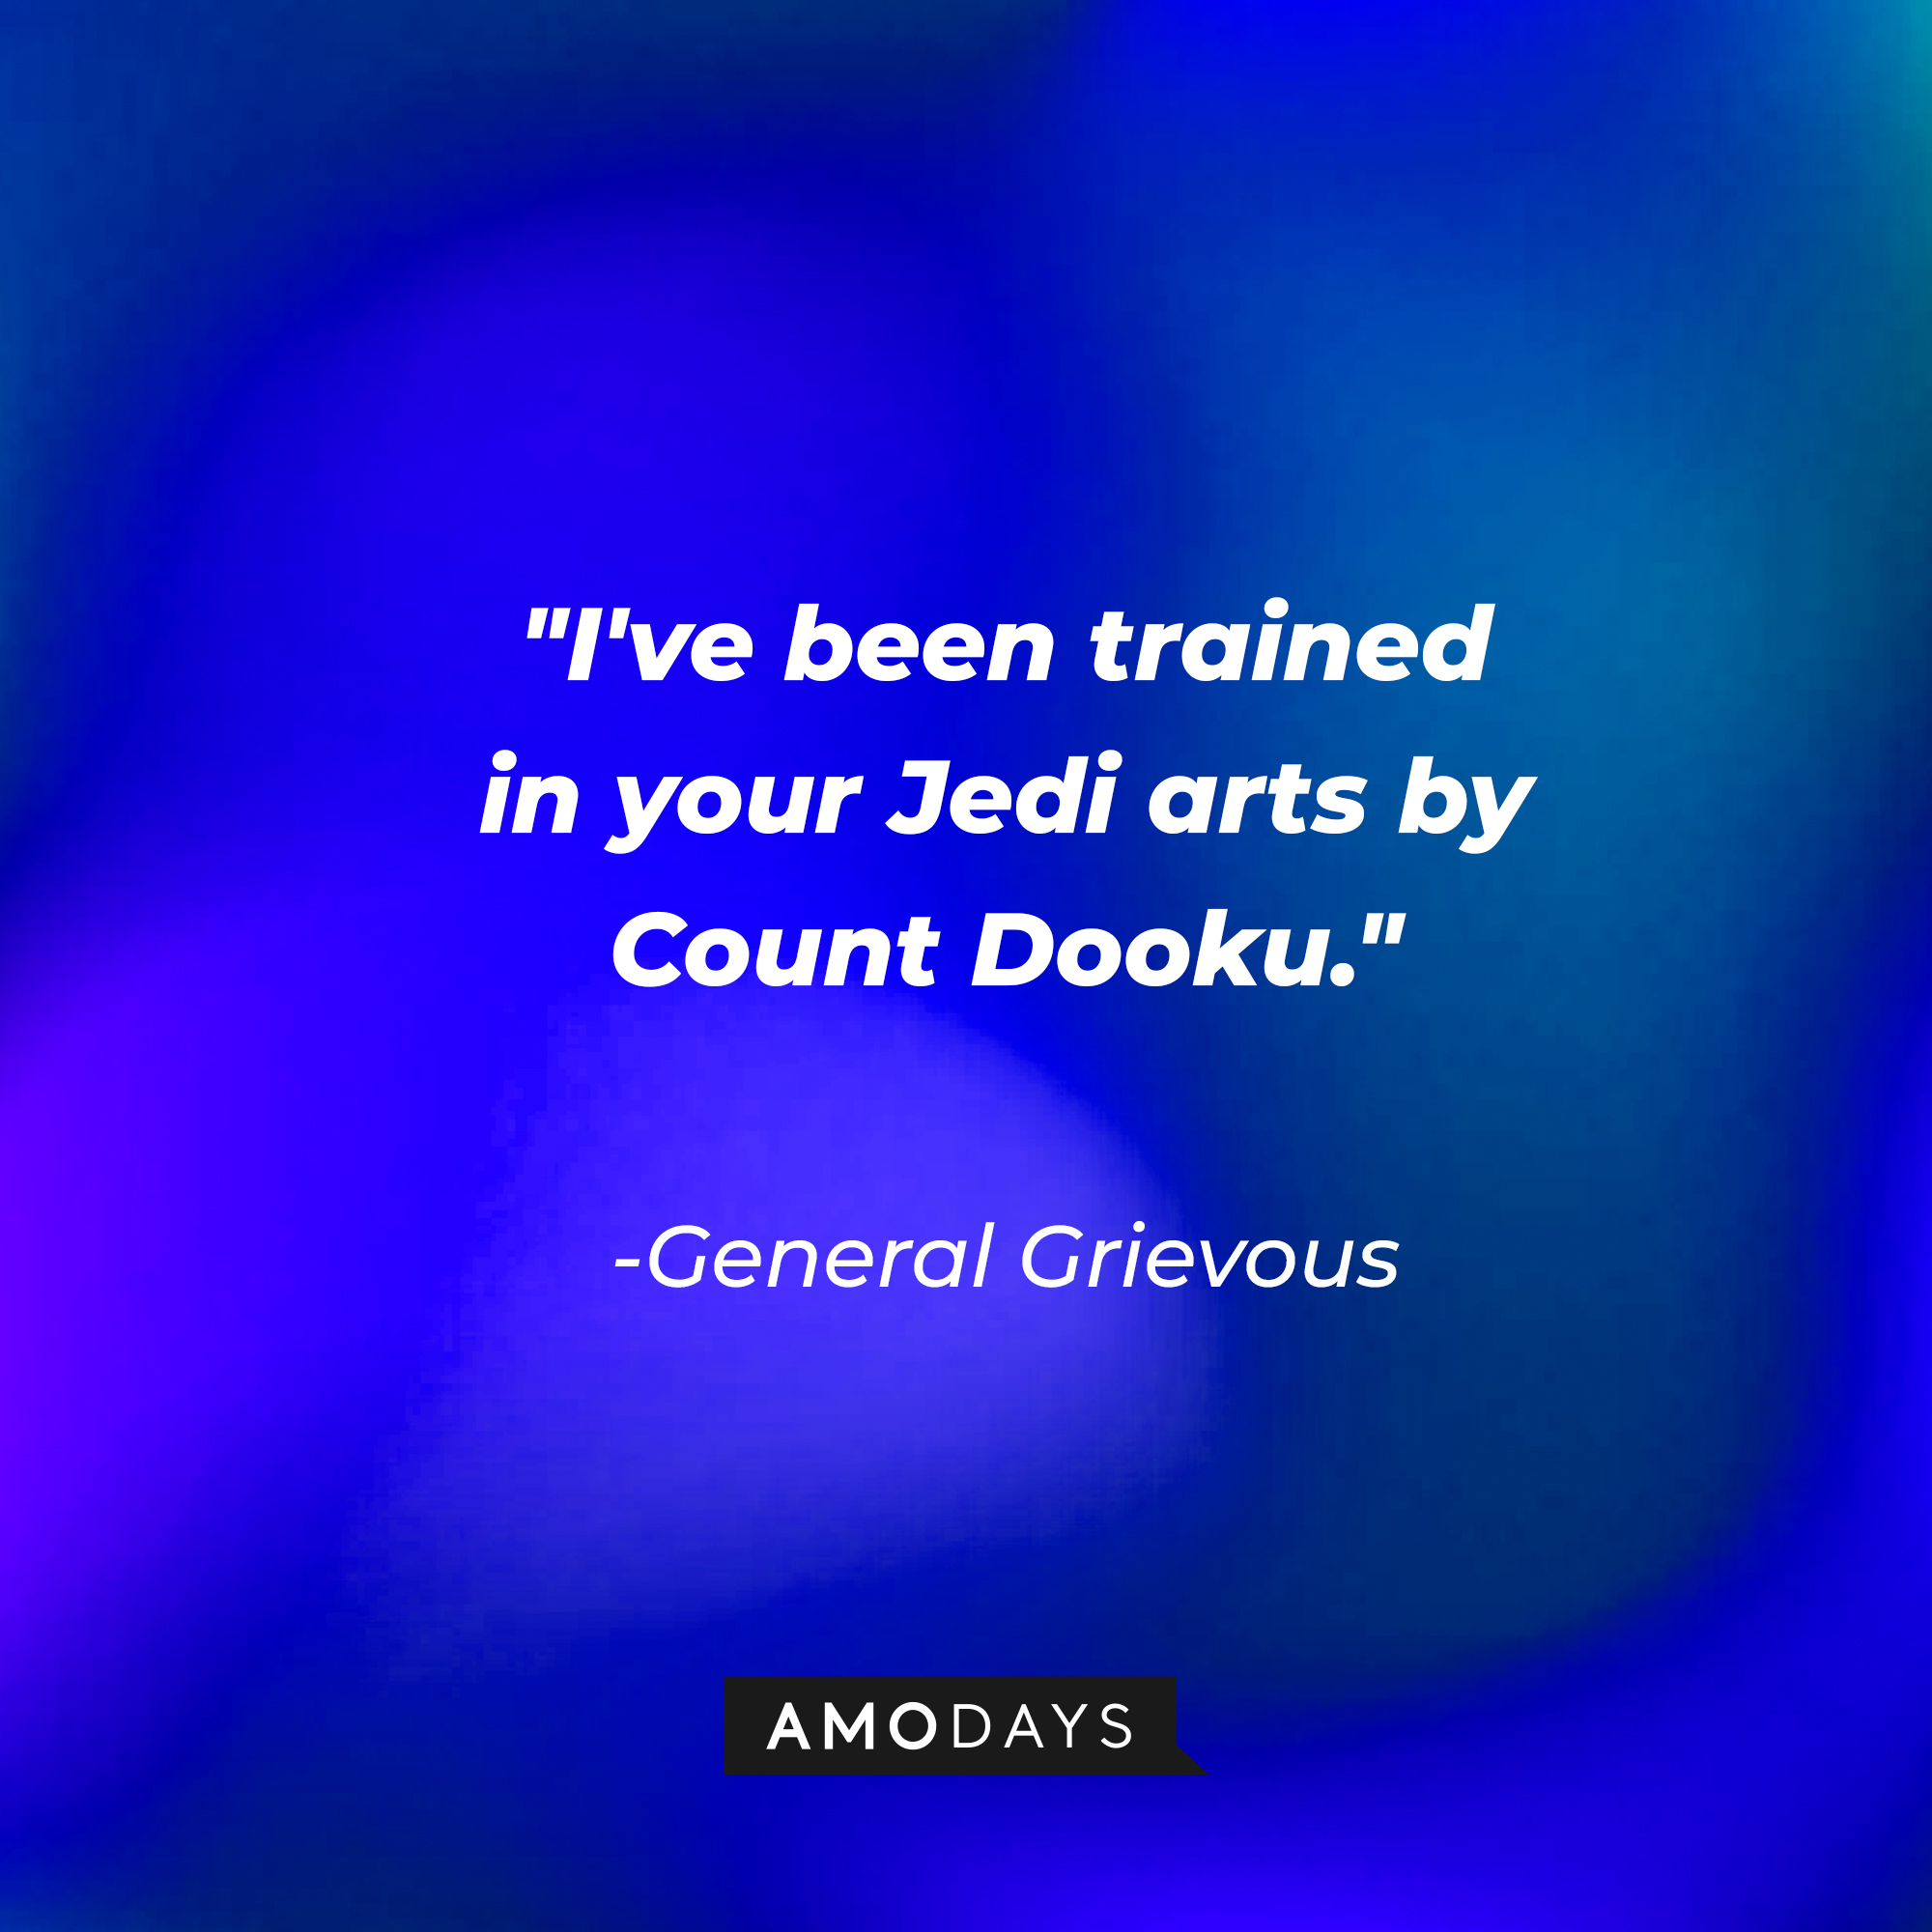 General Grievous' quote: "I've been trained in your Jedi arts by Count Dooku." | Source: AmoDays